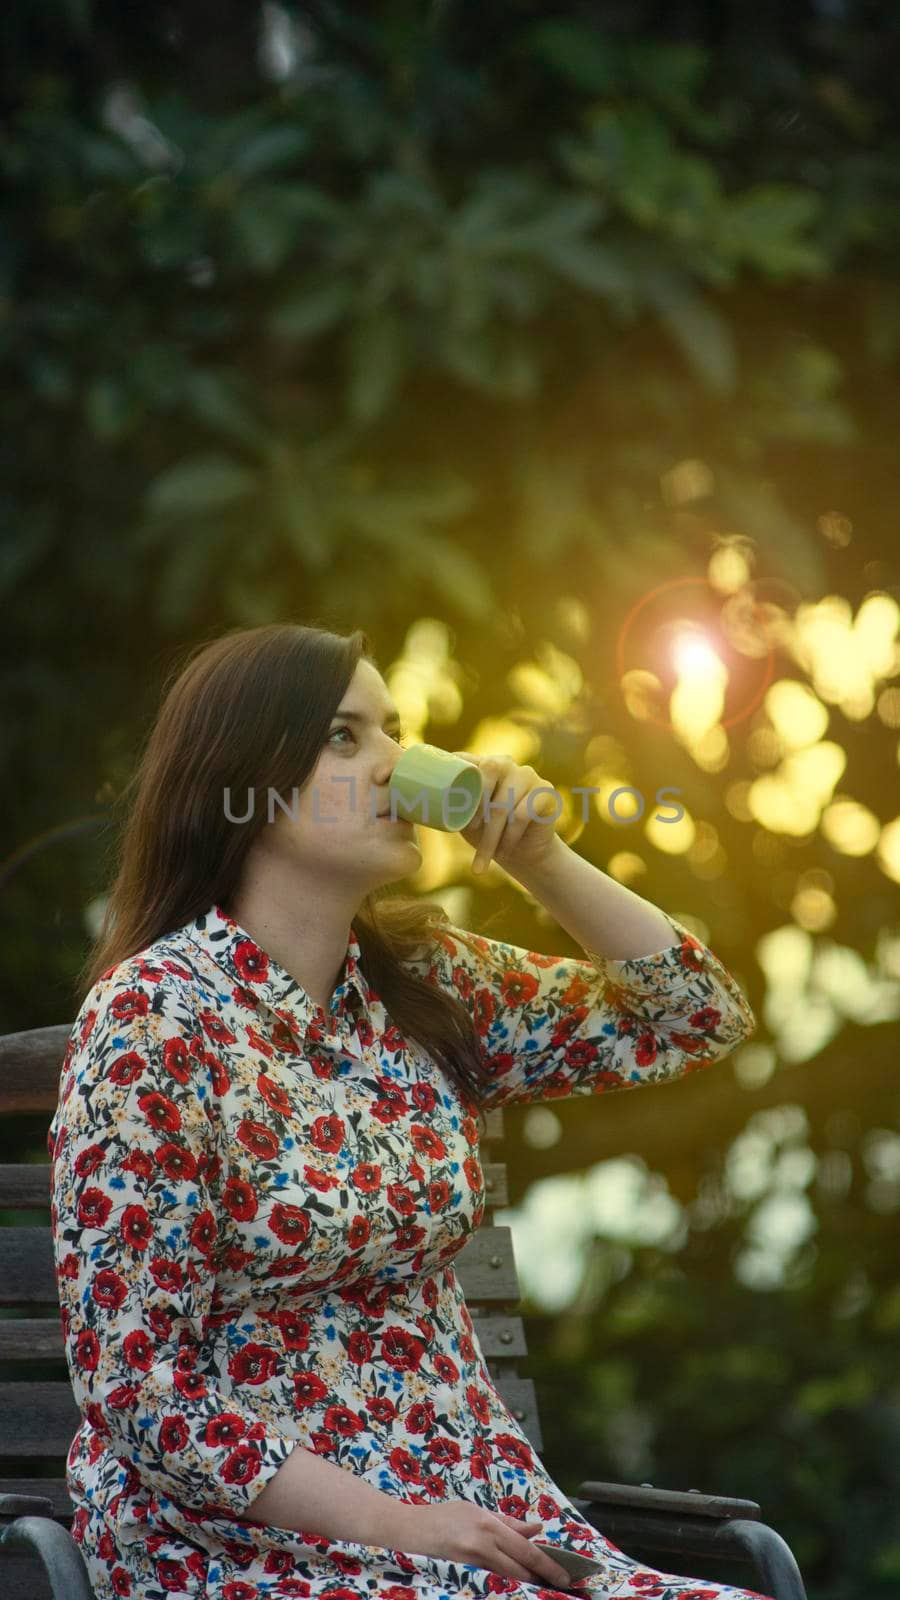 Beautiful latin young woman in white floral design dress drinking a cup of coffee in the garden at sunset with the sun's rays passing through the trees in the background